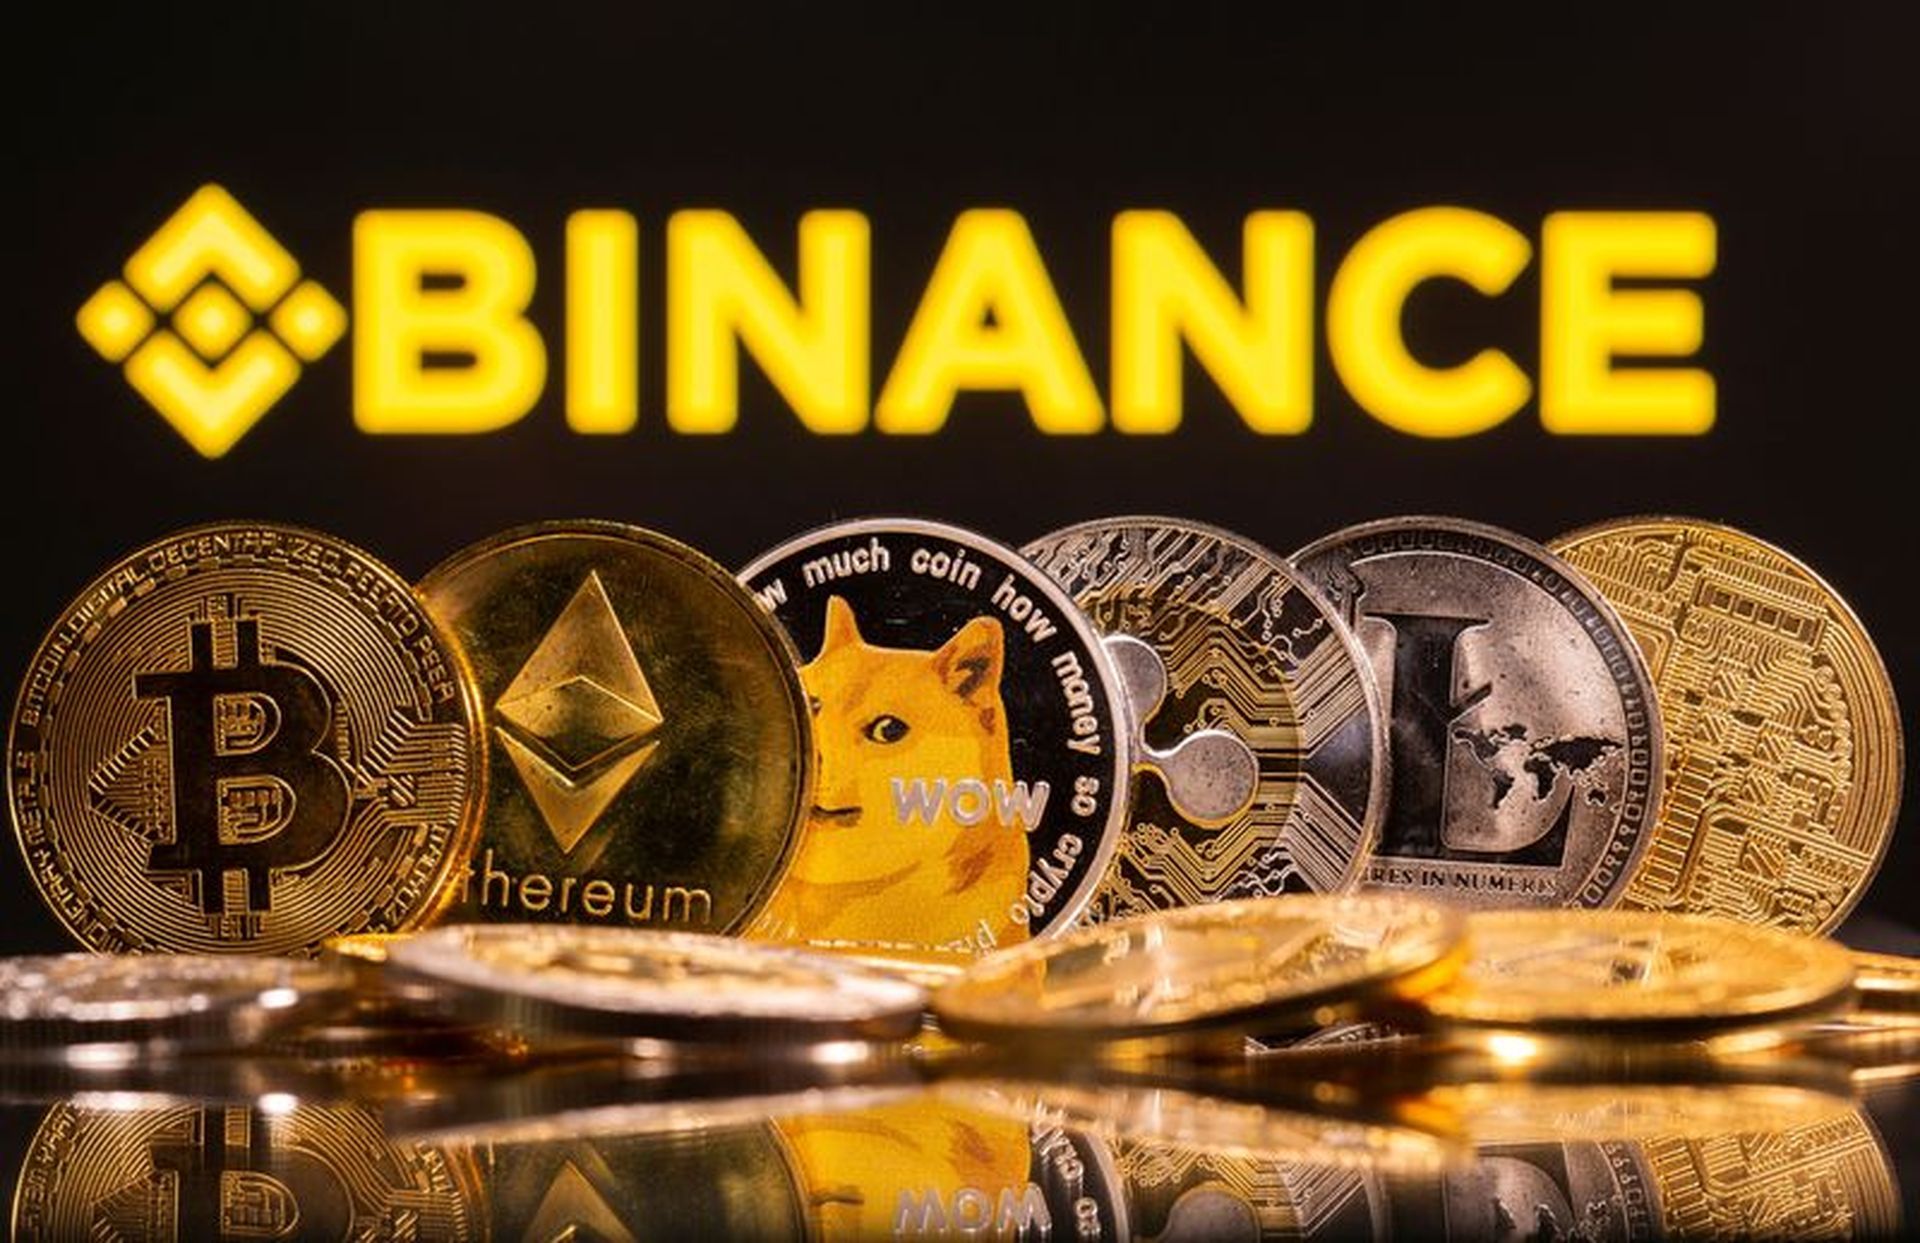 Today, we are here to show you the Binance Crypto WODL answers (29 August). If you find the correct cryptocurrency term in the Binance news, you might win a...